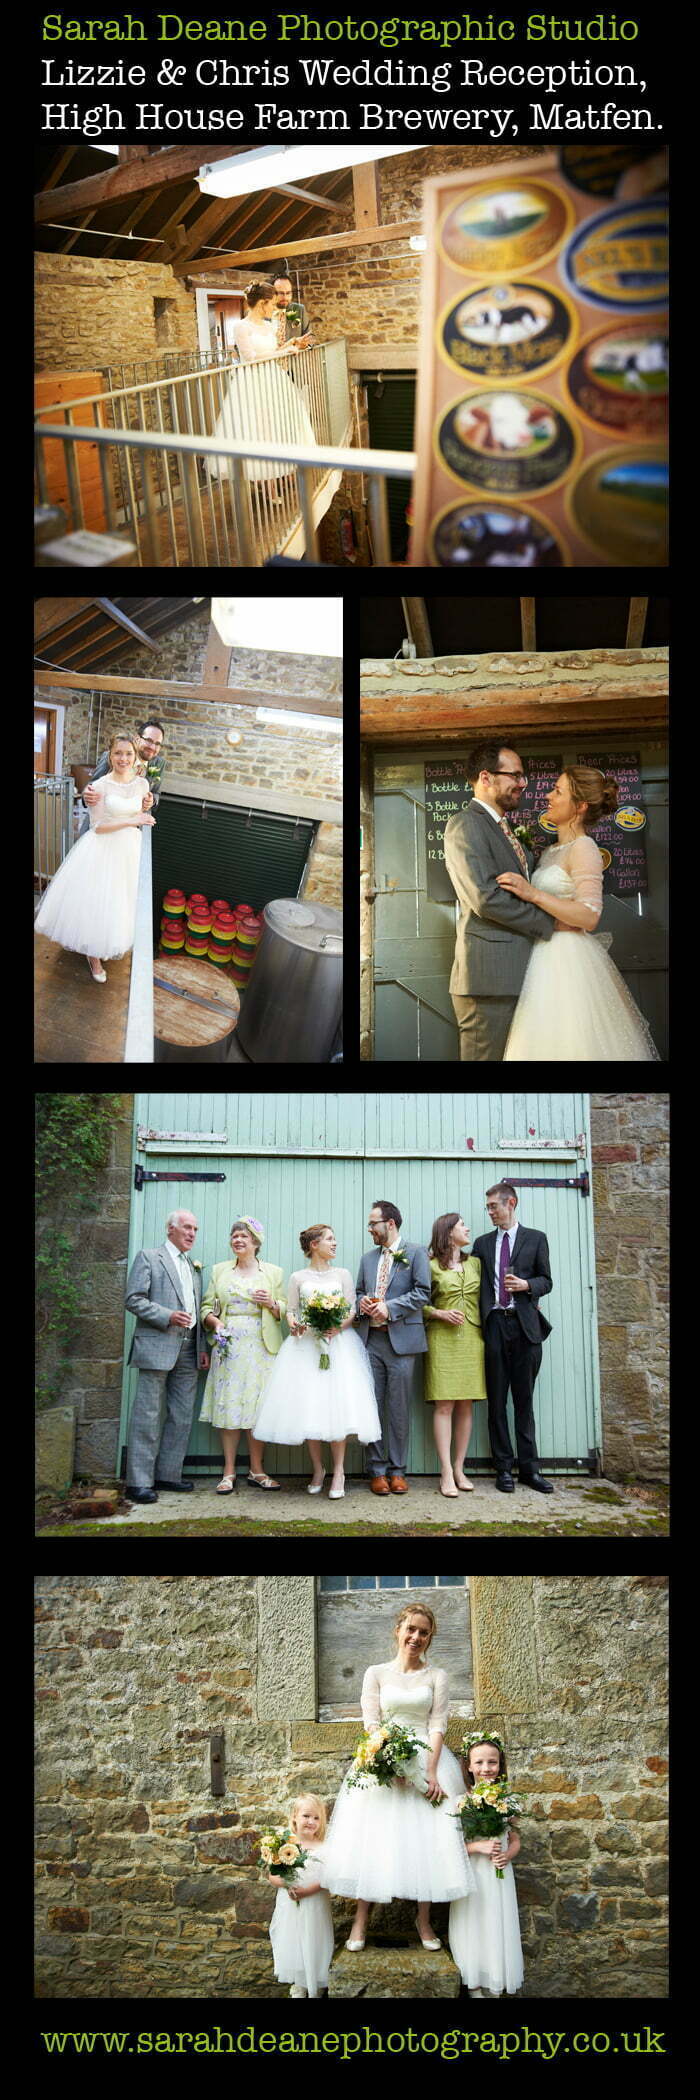 lizzie and chris wedding photos at reception, high house farm, matfen northumberland